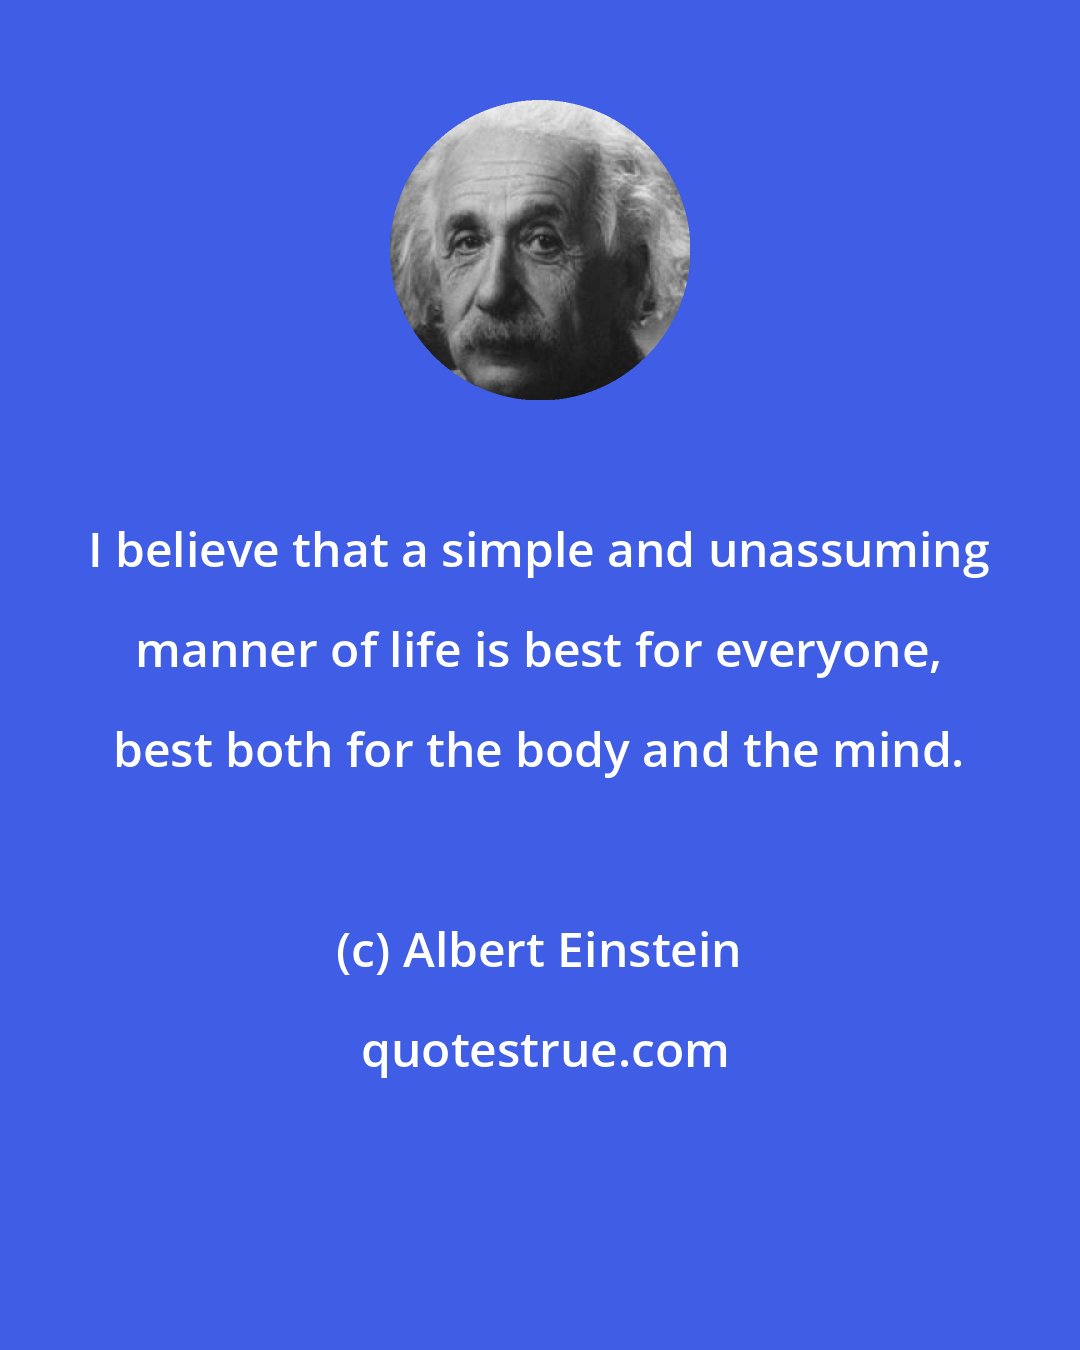 Albert Einstein: I believe that a simple and unassuming manner of life is best for everyone, best both for the body and the mind.